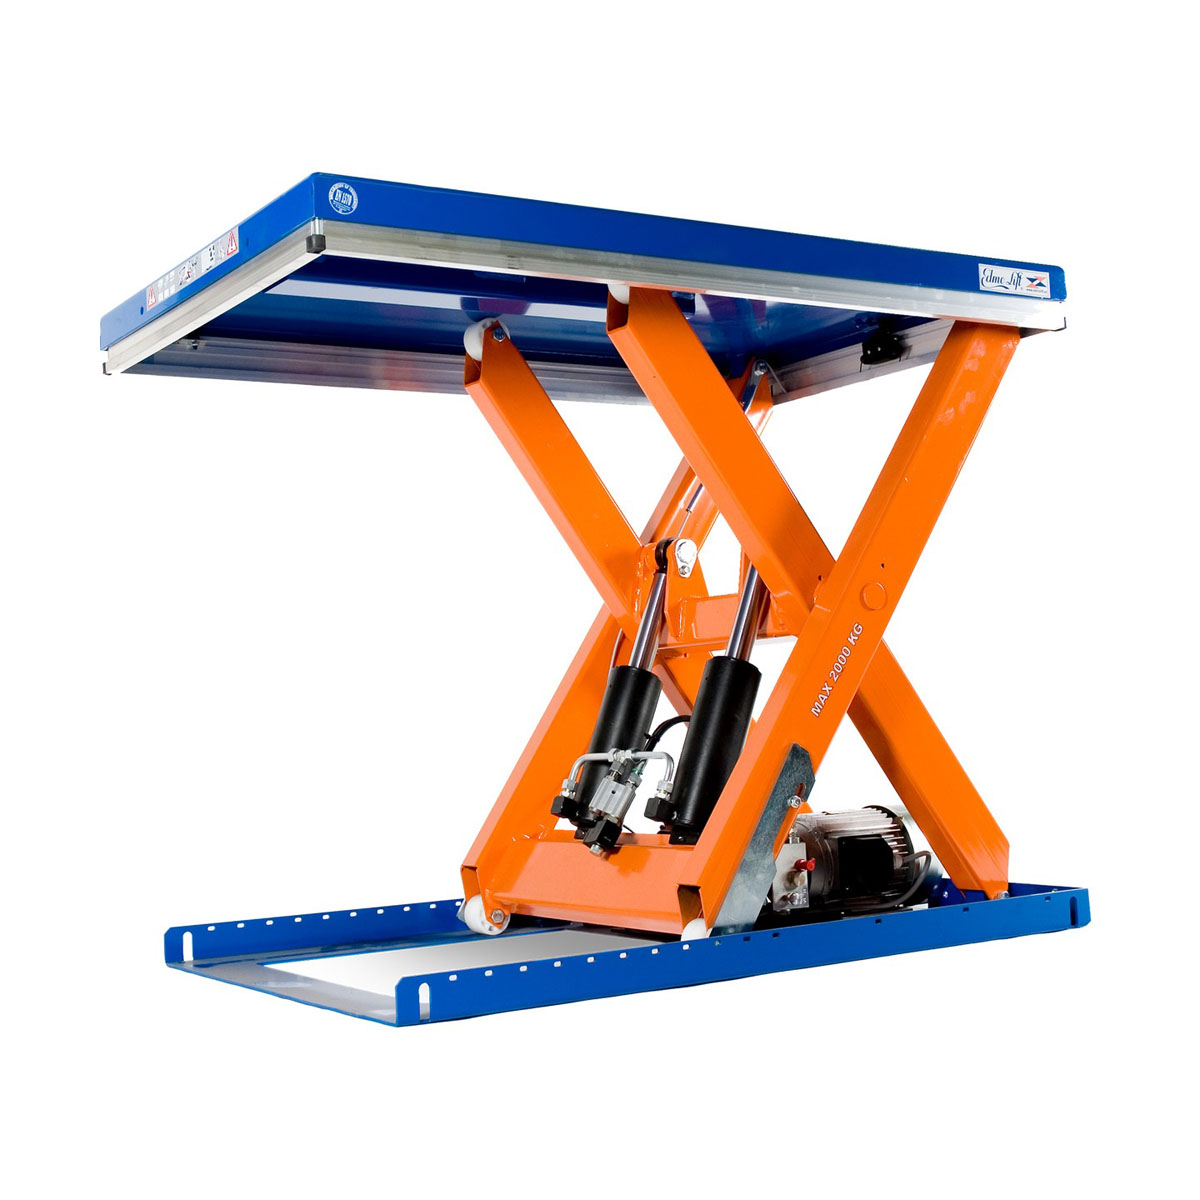 Buy Scissor Lift Table (Electric) in Scissor Lift Tables from Edmolift available at Astrolift NZ